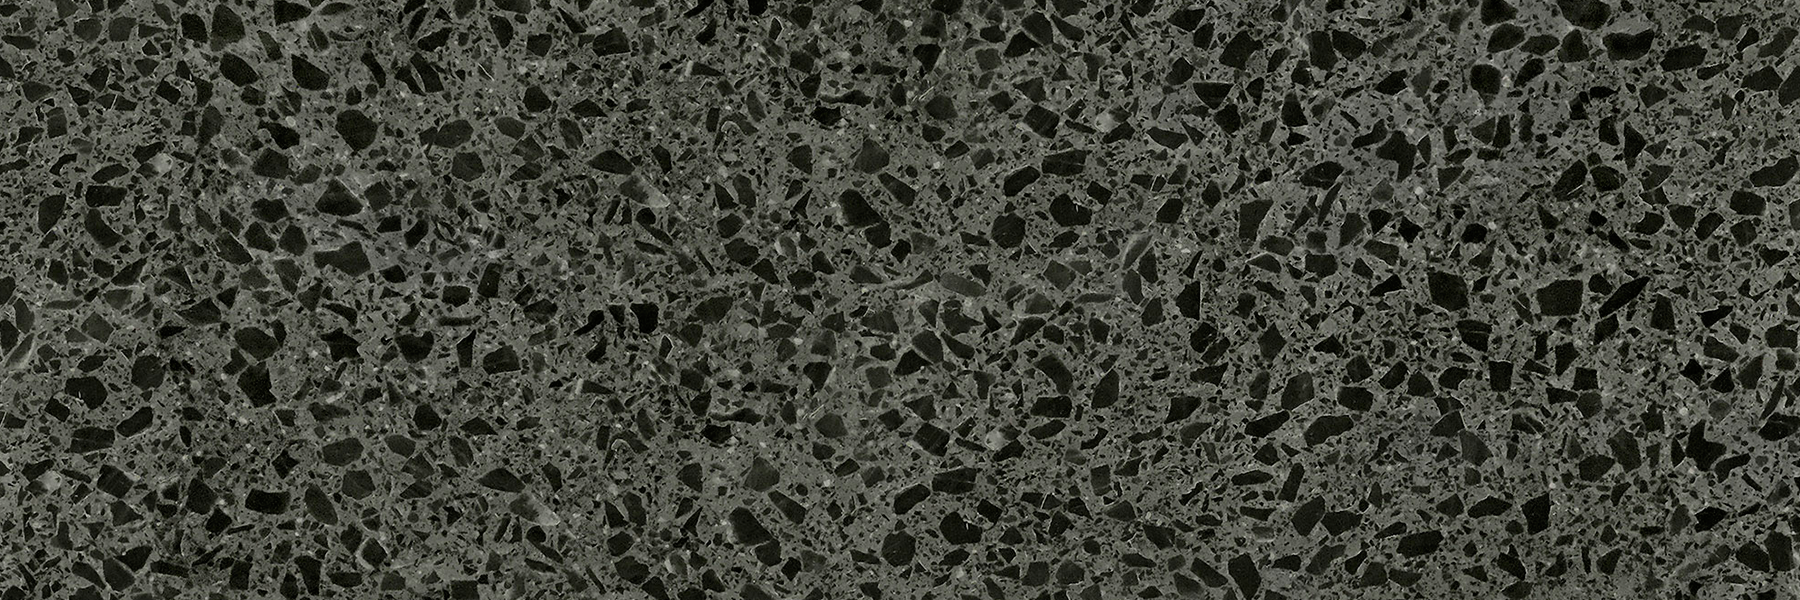 COMPAC, COMPACSURFACES, COMPAC THE SURFACE COMPANY, MARBLE COLLECTION, CLASSIC DARK GREY